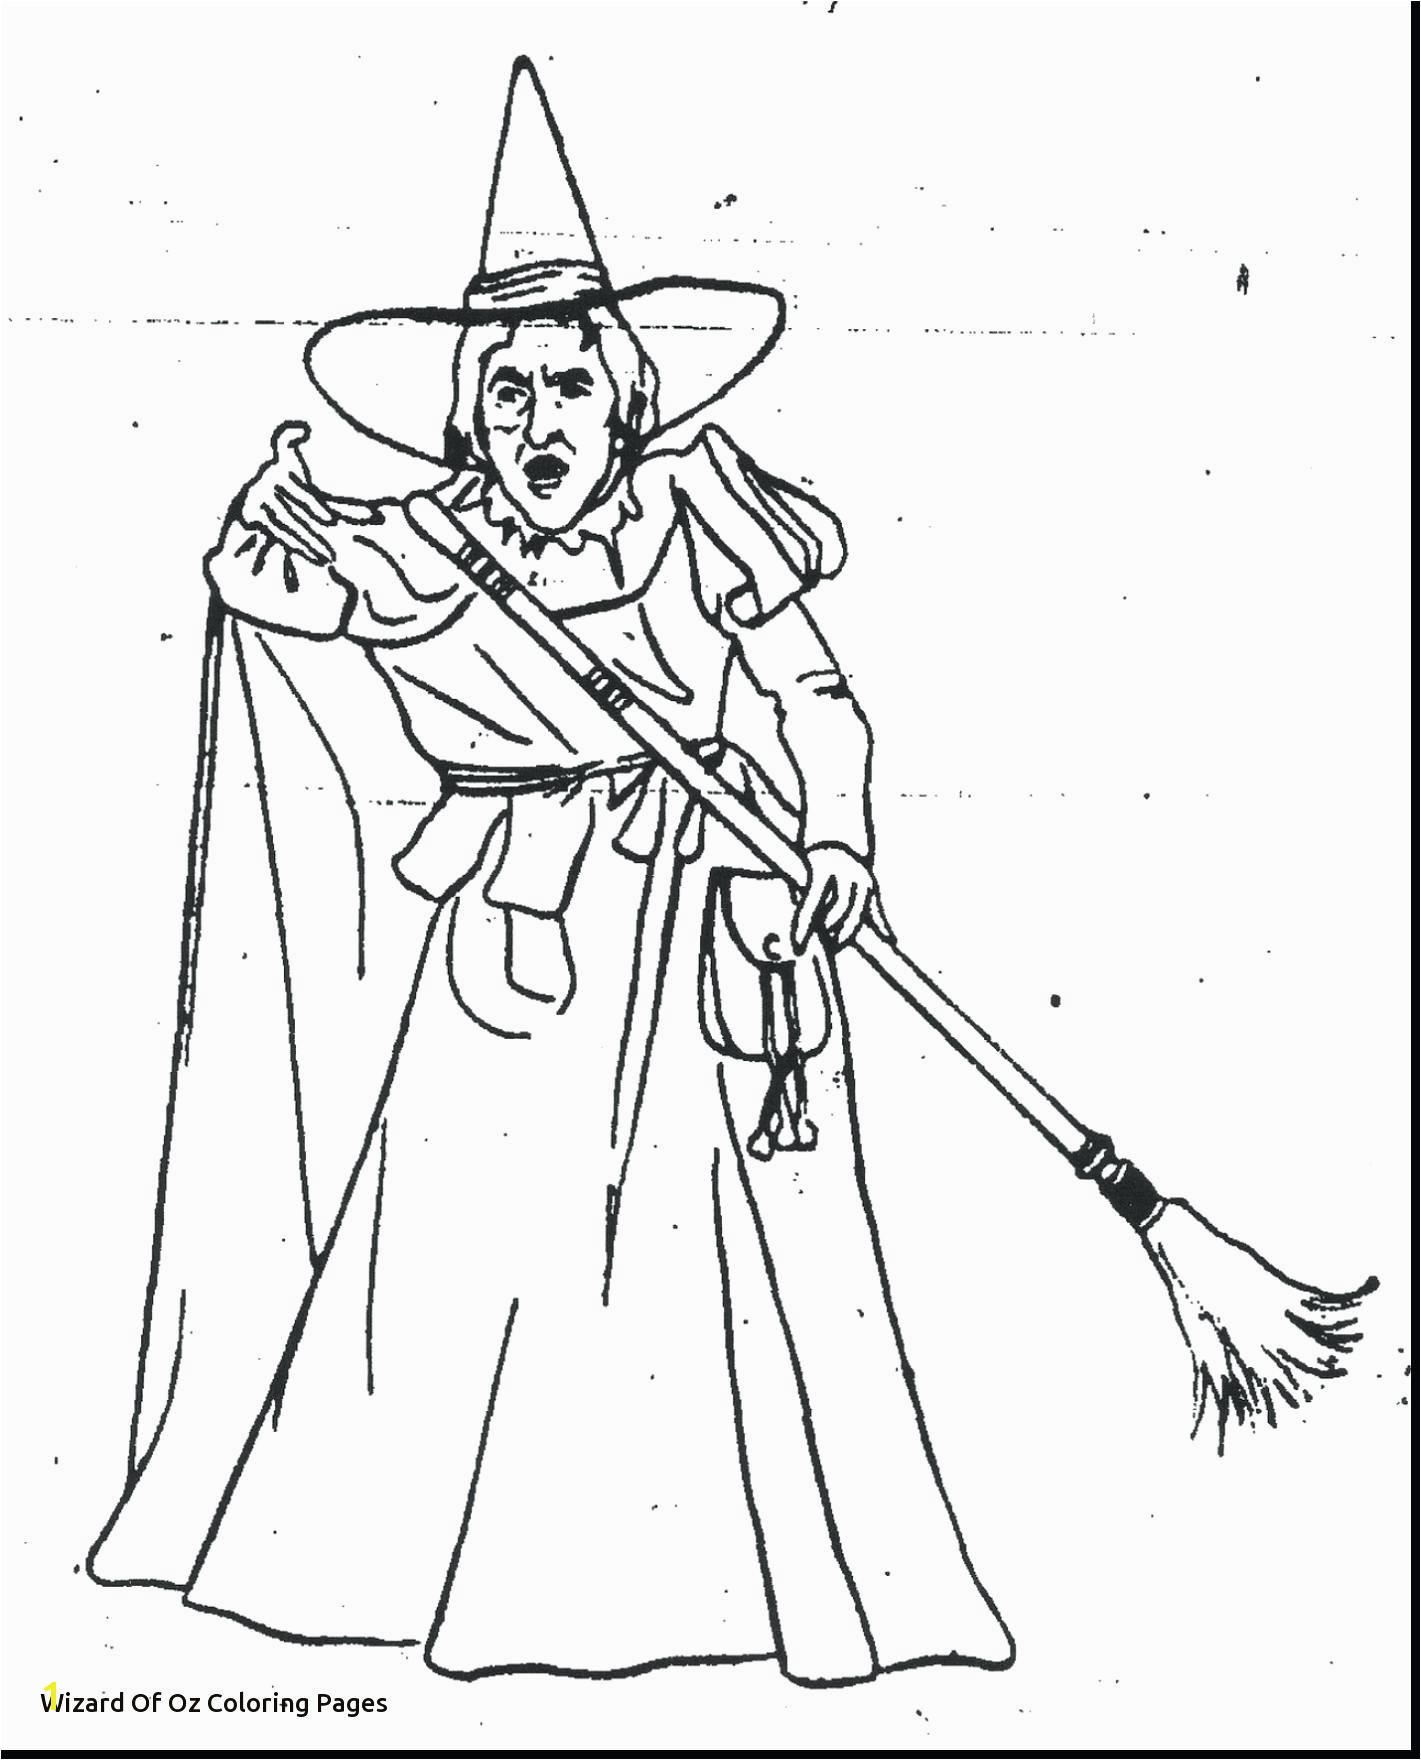 The Wizard Of Oz Coloring Pages Wizard Oz Printable Coloring Pages Wizard Oz Coloring Pages